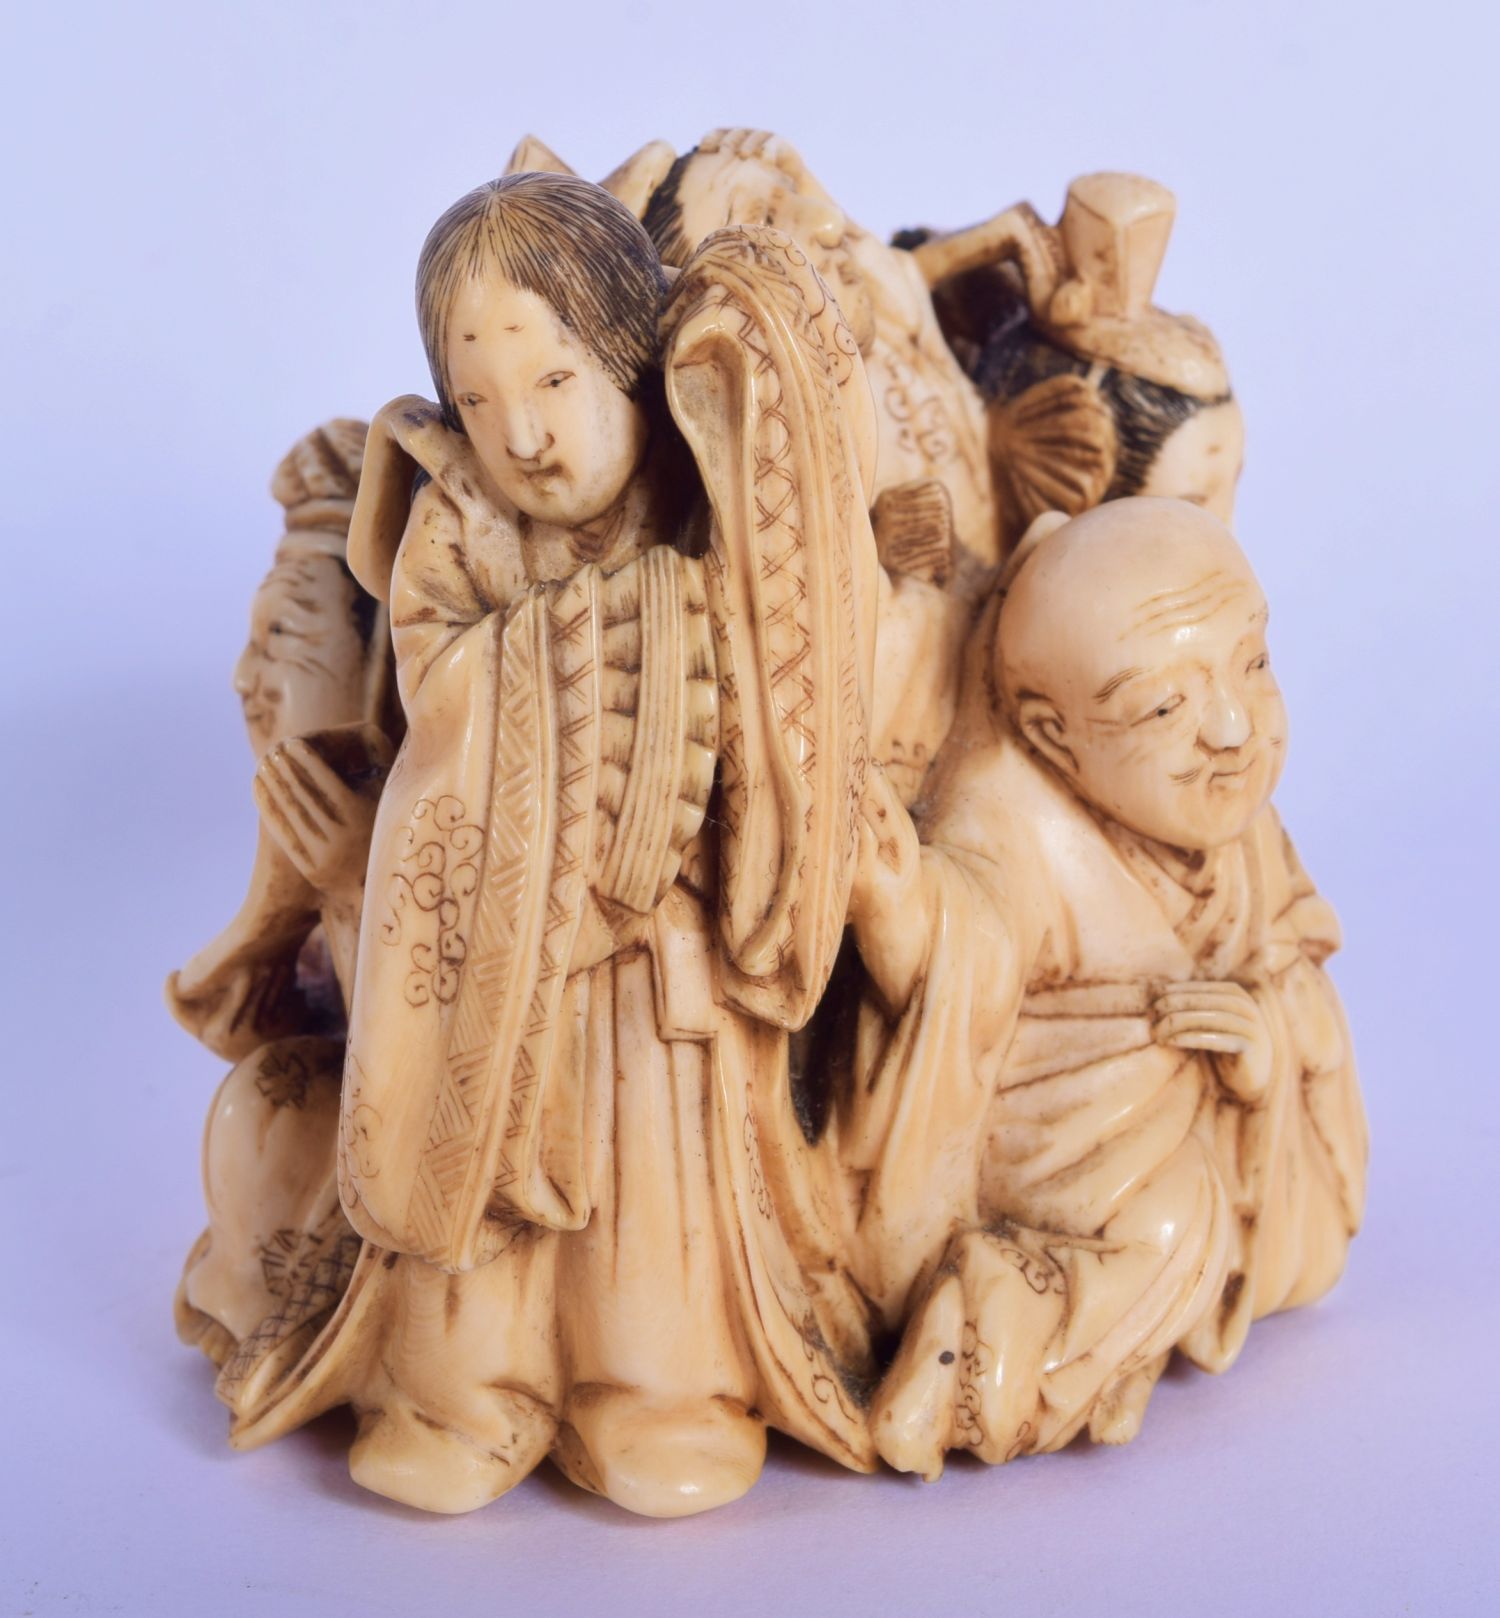 A FINE 19TH CENTURY JAPANESE MEIJI PERIOD CARVED IVORY OKIMONO modelled as various figures, includin - Image 4 of 5